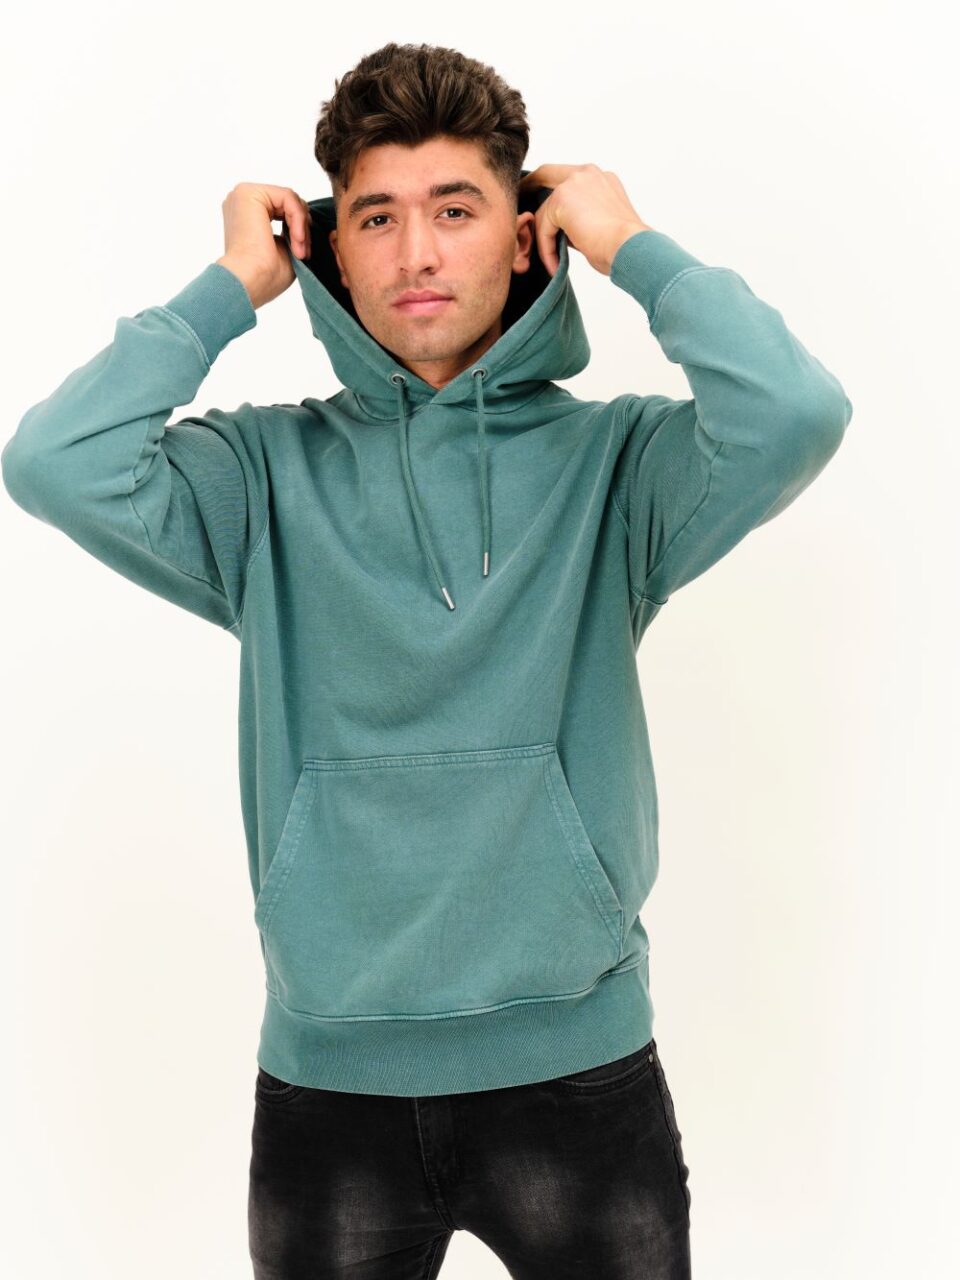 STROM Clothing_Basics_Washed Teal Green Hoodie